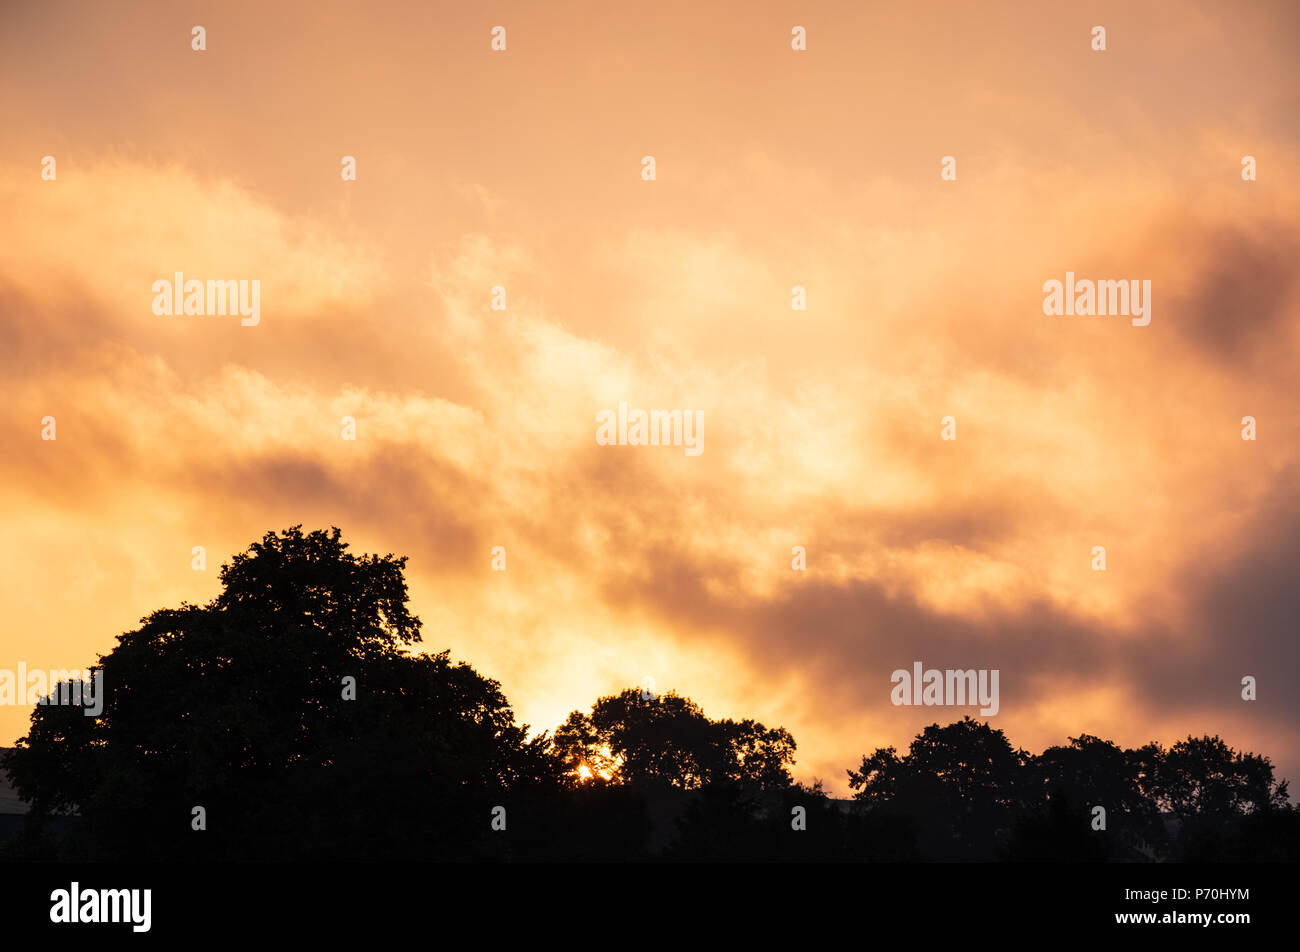 Fiery orange cloudy sky at sunset with tree silhouette at bottom perfect for use as a backdrop with a lot of space for advertising words and phrases Stock Photo